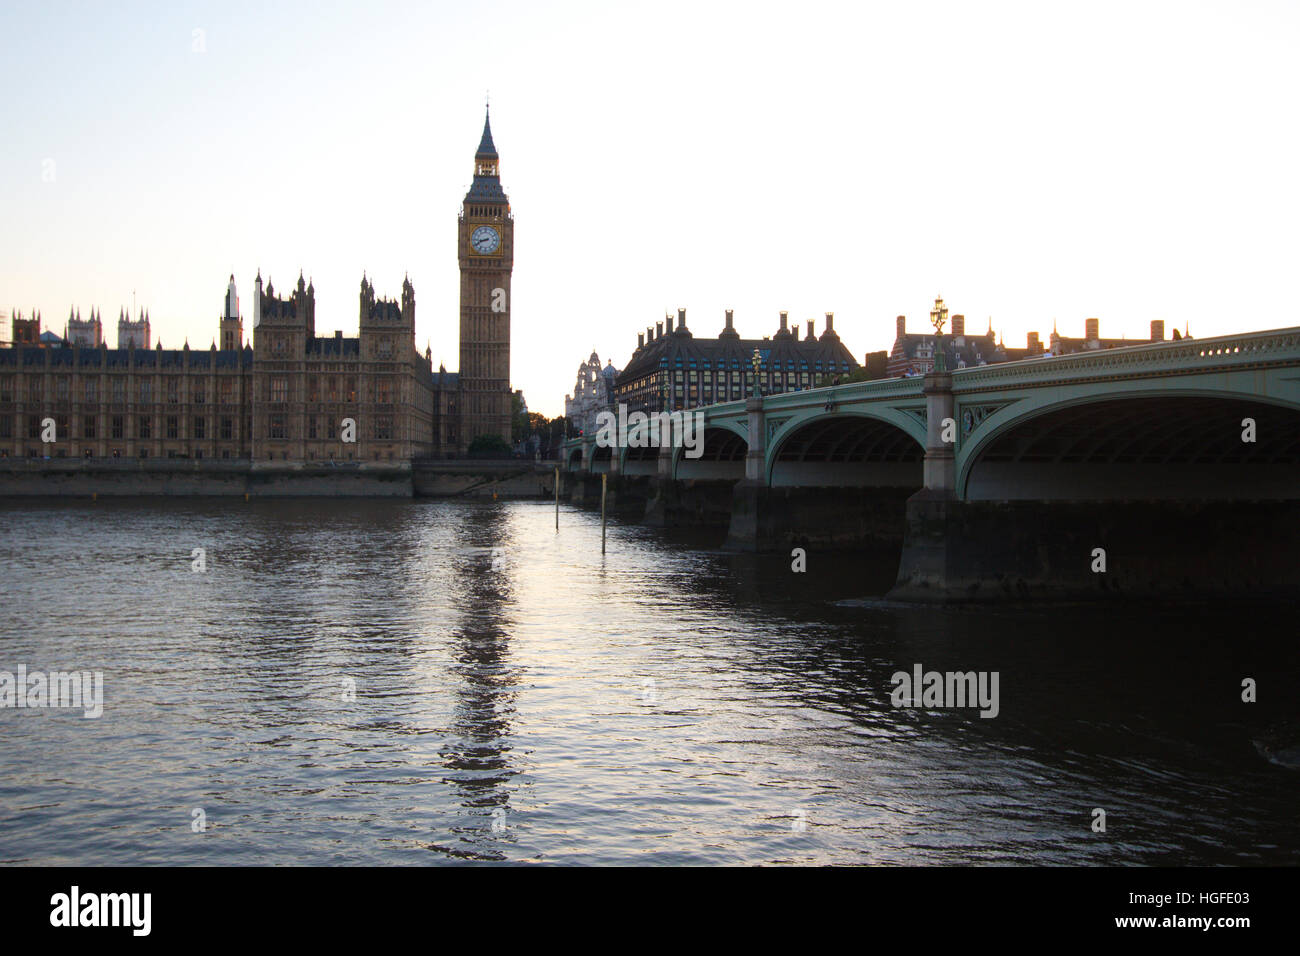 Parliament and Big Ben in London Stock Photo